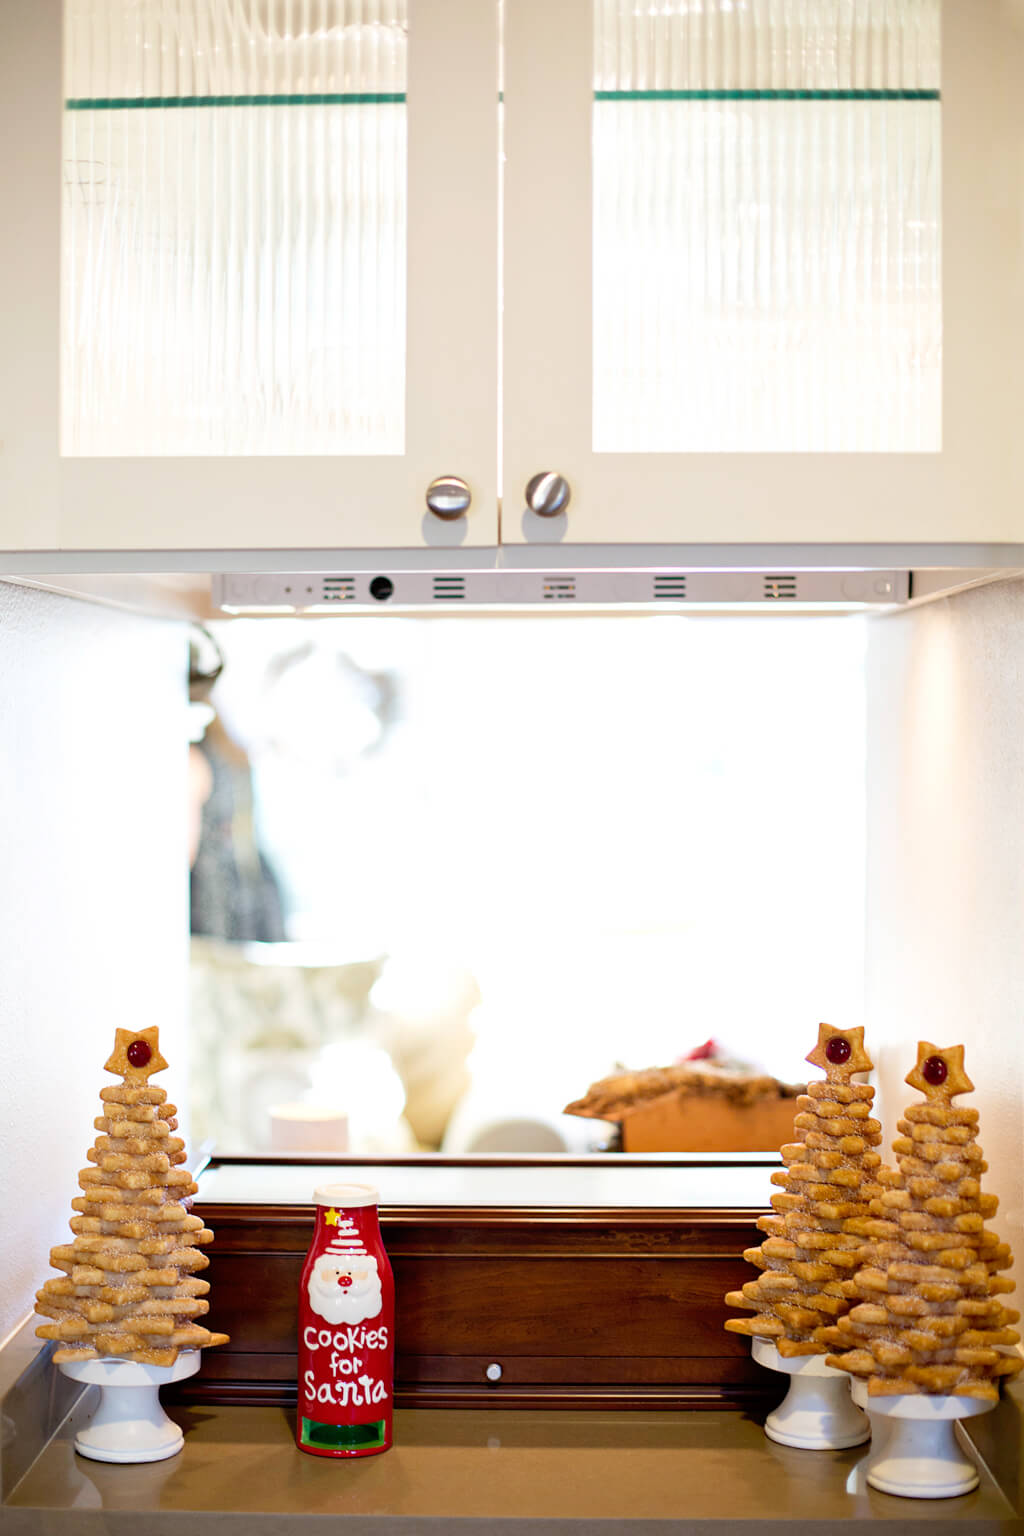 Holiday Home Tour // Christmas Decor // www.https://www.thehisfor.com